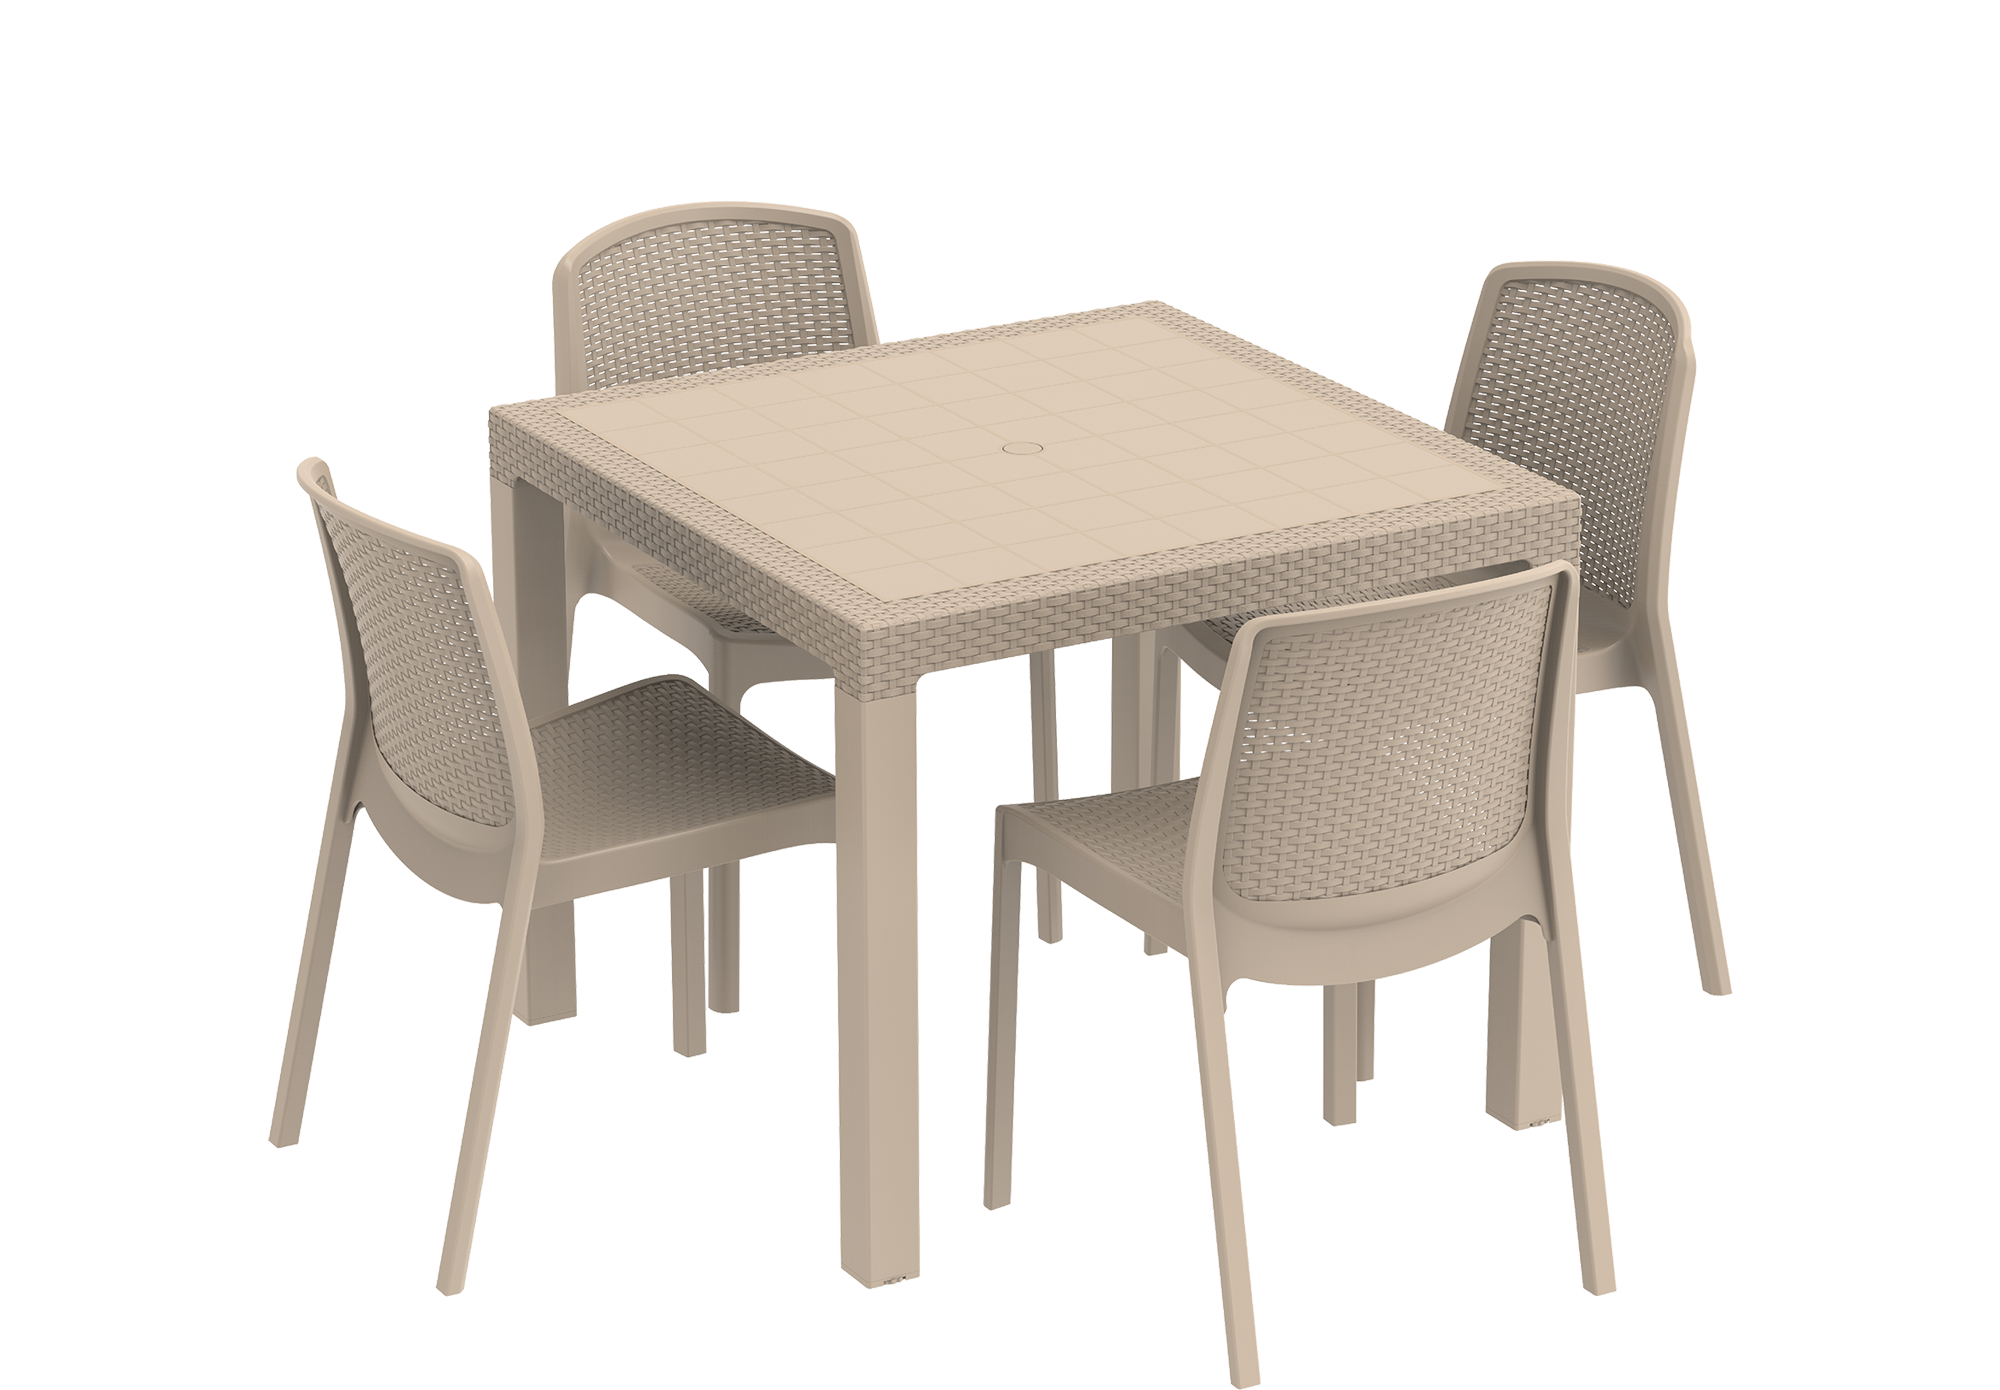 Cedarattan 4-seater Outdoor Dining Set of Table & Chairs - Cosmoplast Qatar